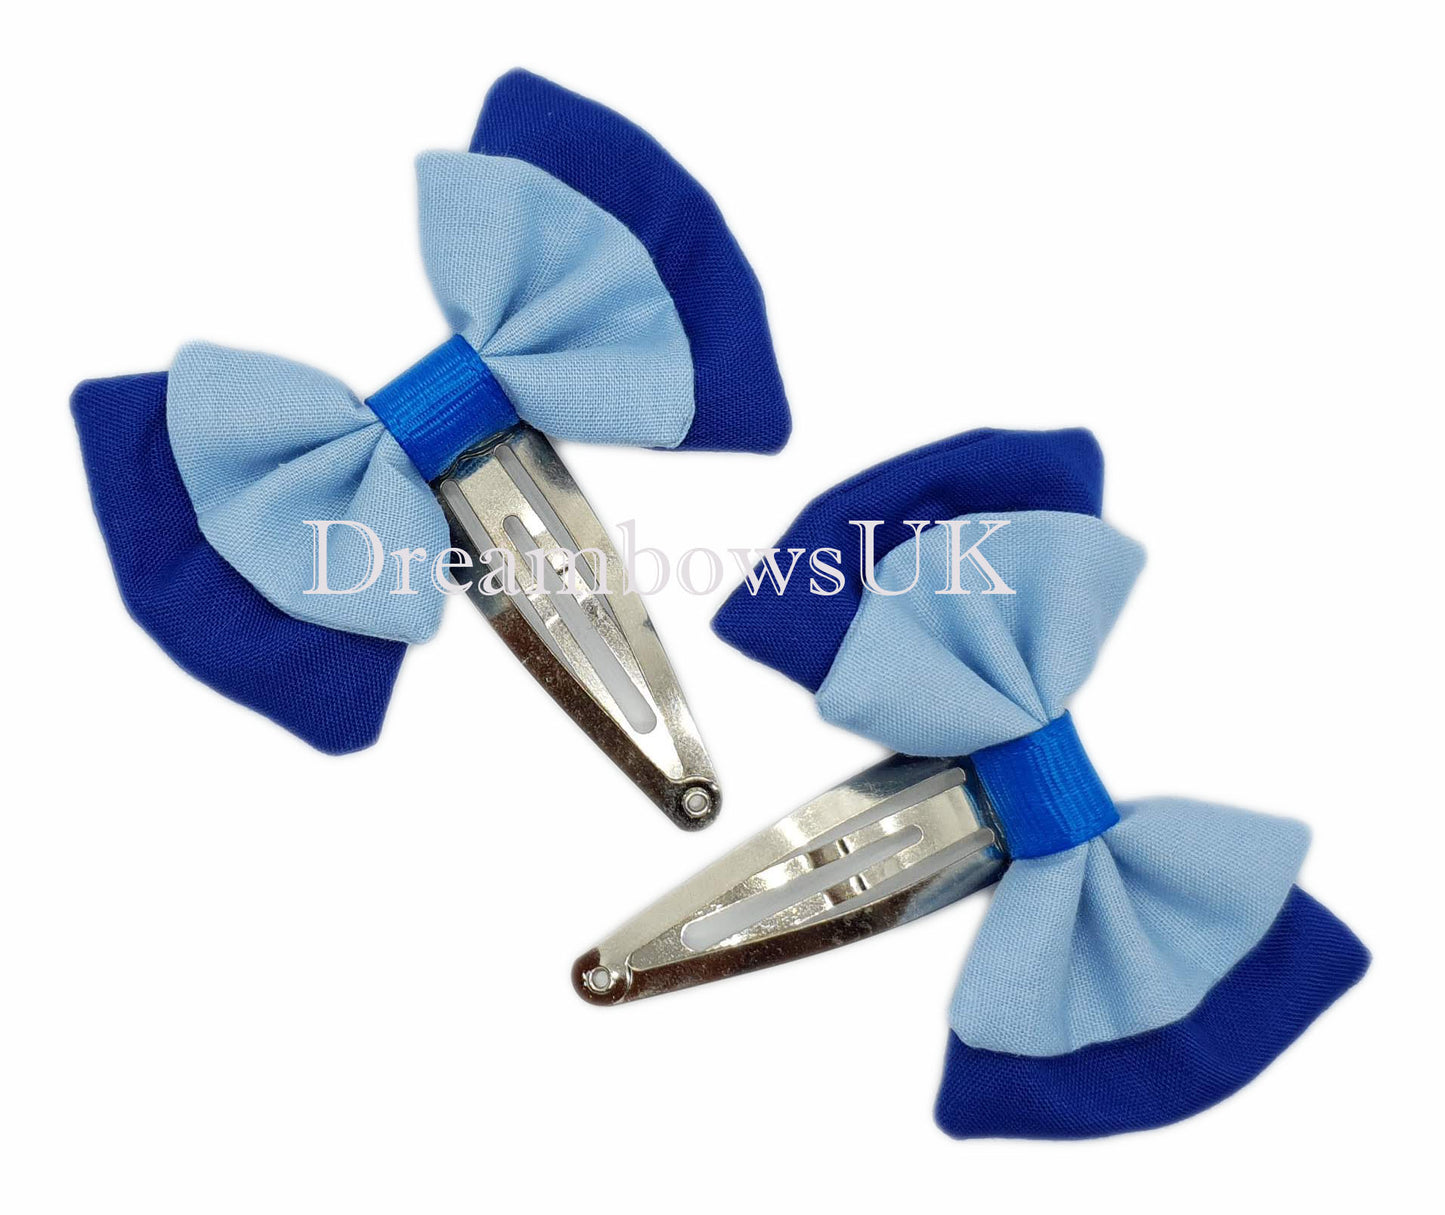 2x Royal blue and baby blue fabric hair bows